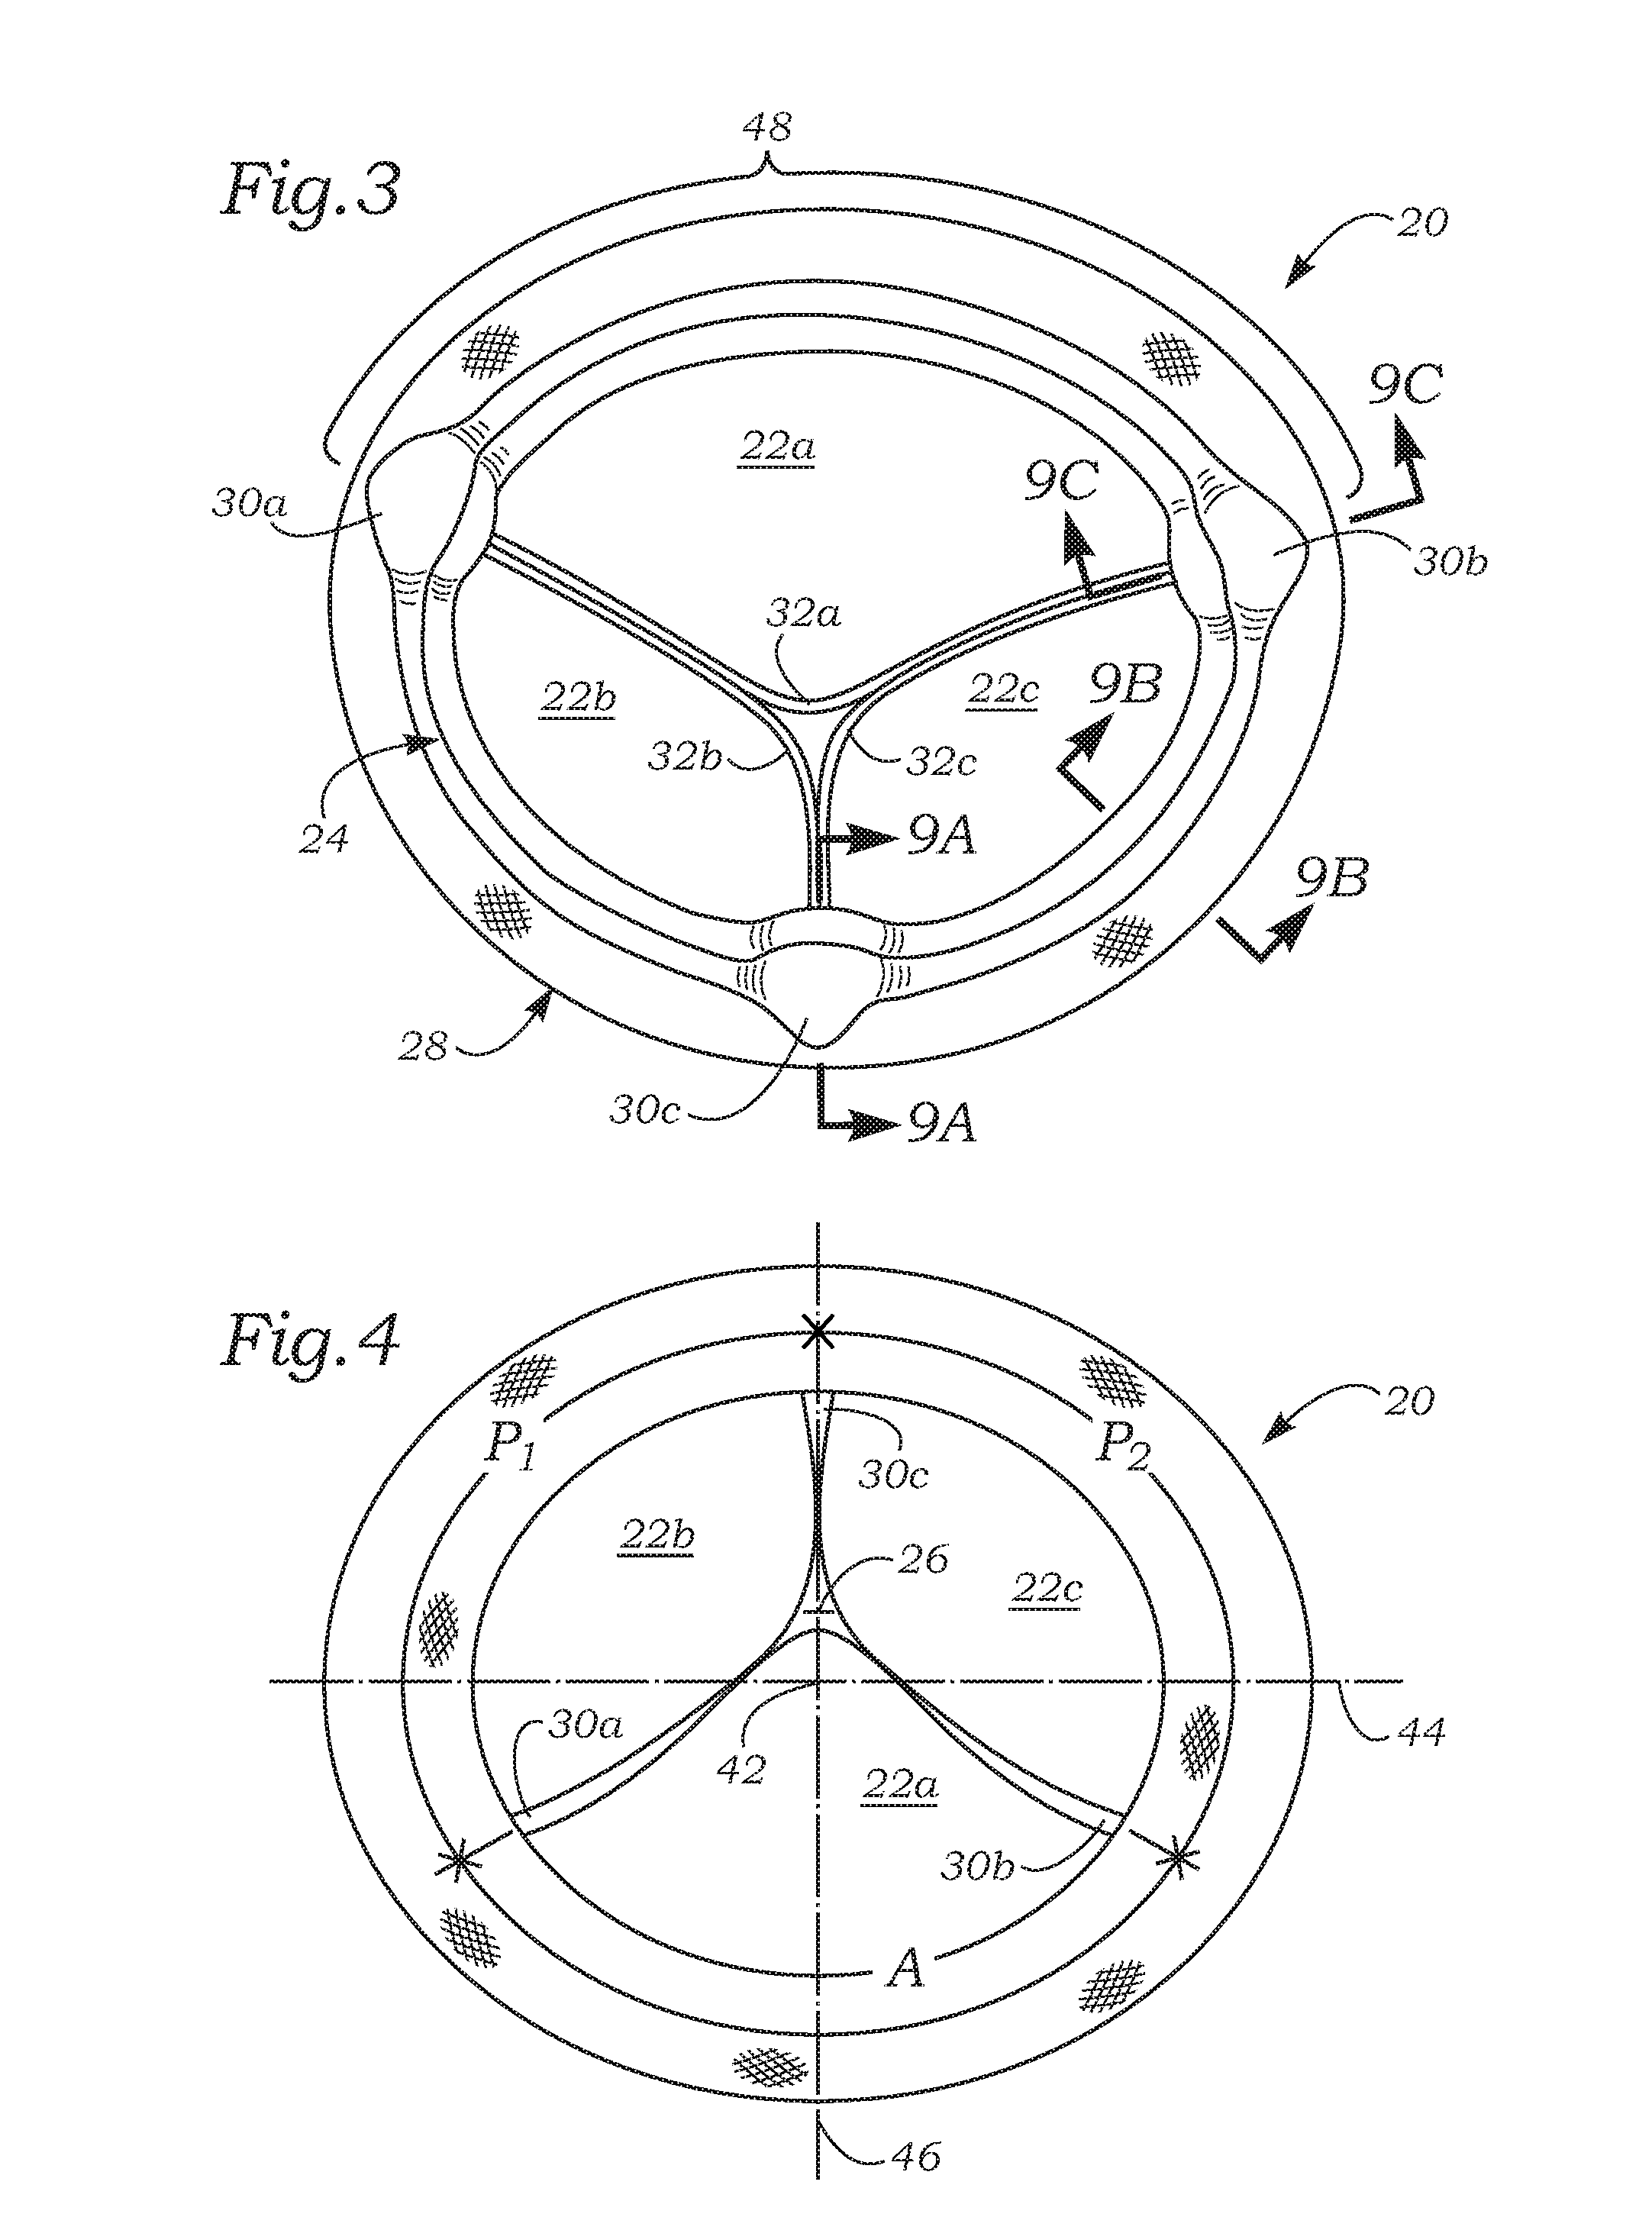 Anatomically Approximate Prosthetic Mitral Valve